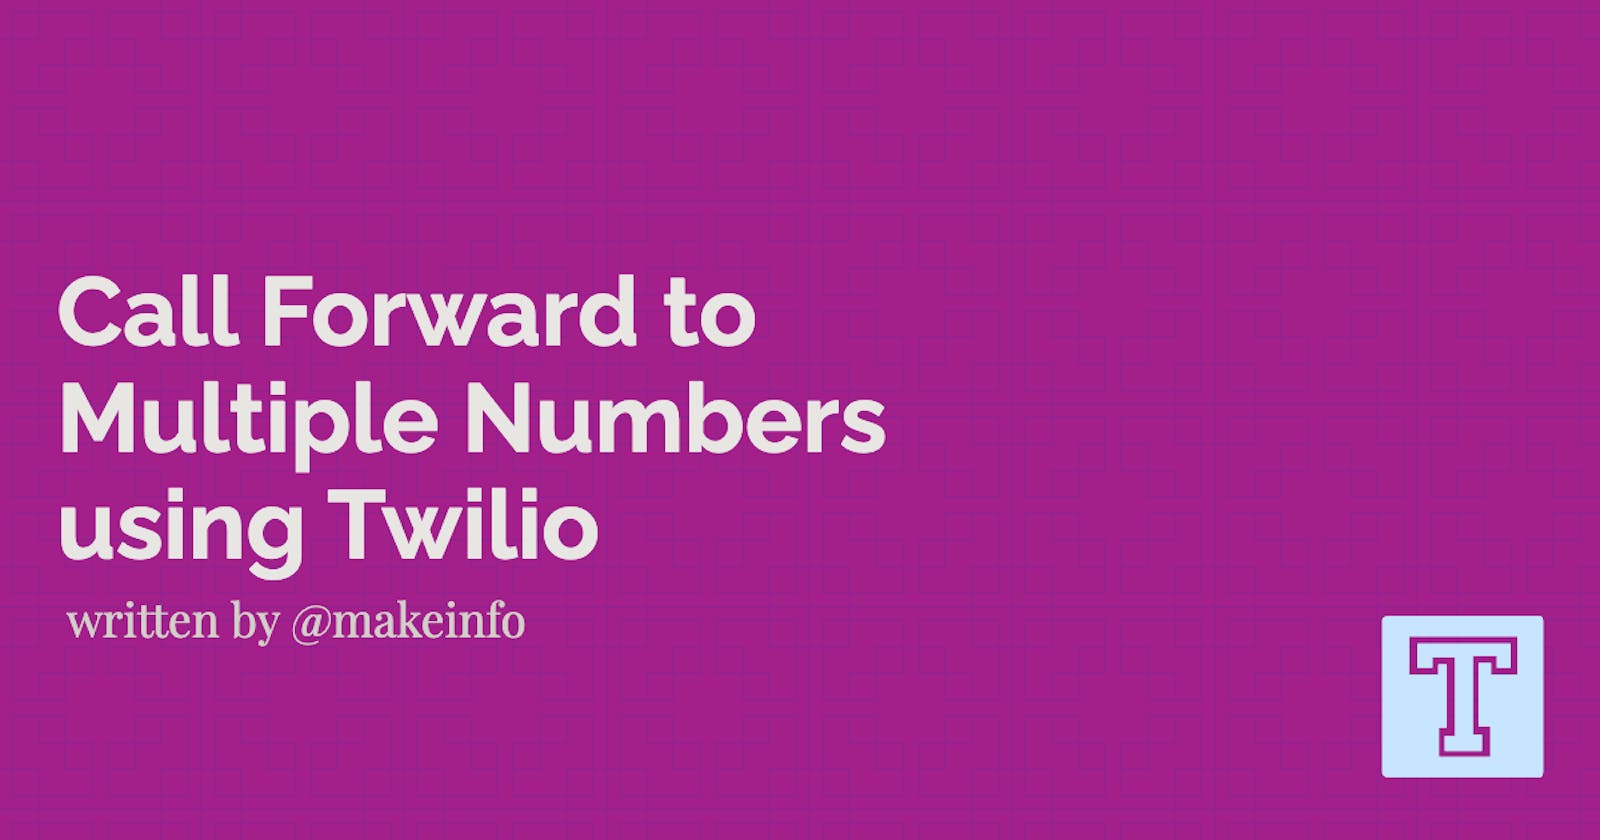 Call Forward to Multiple Numbers using Twilio